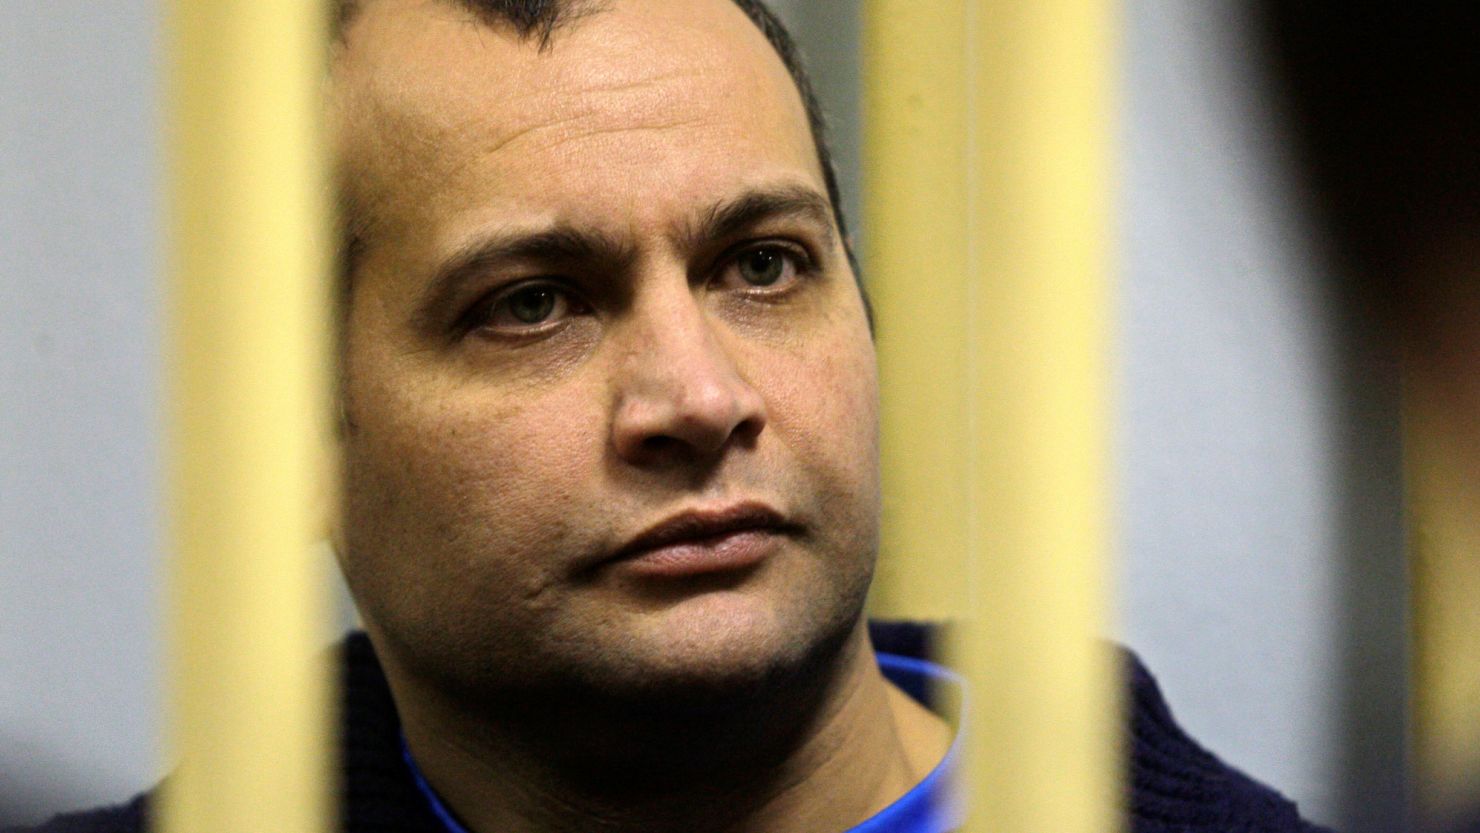 Sergei Khadzhikurbanov, a former Moscow police officer, sits behind bars at a court room in Moscow on Monday, Nov. 17, 2008. The suspects being tried on murder charges are Sergei Khadzhikurbanov _ a former Moscow police officer _ and Makhmudov's brothers, Ibragim and Dzhabrail. A Russian court ruled Monday that the trial of three men accused of involvement in the slaying of journalist Anna Politkovskaya should be open to the public. (AP Photo/ Sergey Ponomarev)